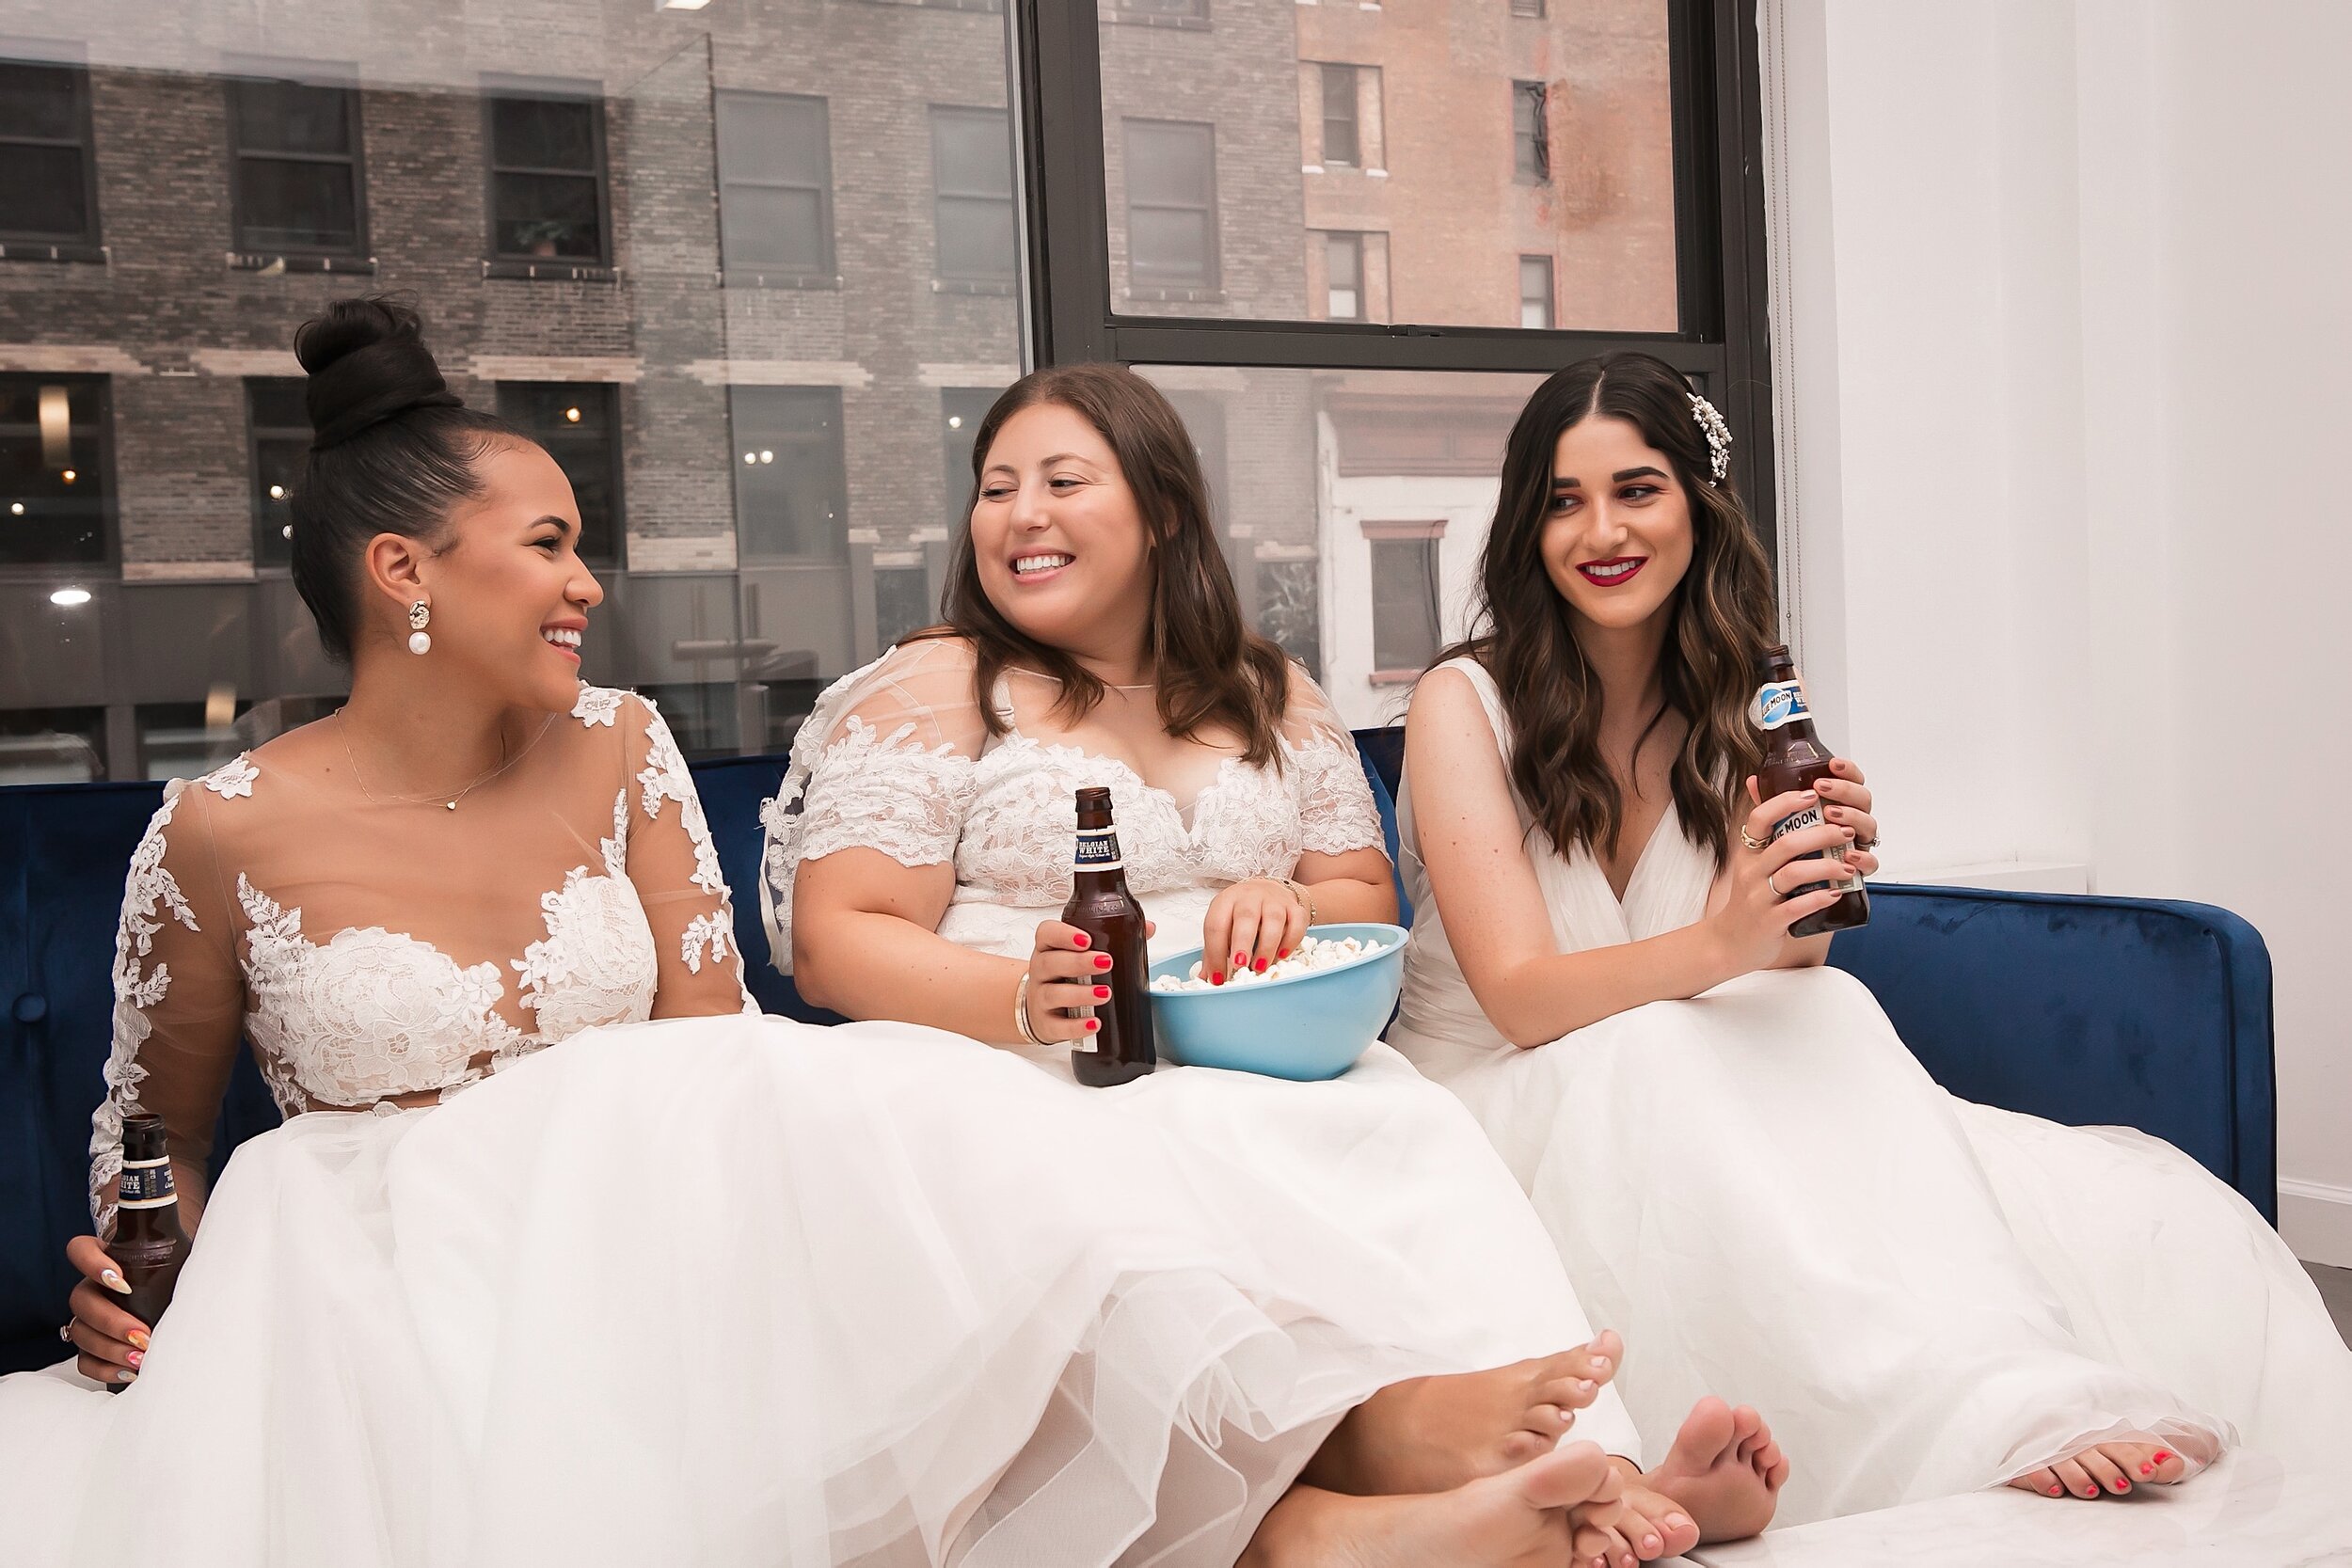 Recreating A Scene From Friends How To Plan A Group Photoshoot Esther Santer NYC Blogging Photoshoot Wedding Dresses Gowns White Rachel Monica Phoebe Popcorn Coffee Movie Night Funny Cosplay Bridal Hair Pretty Beautiful Girls Women  Beer Style Trend.JPG